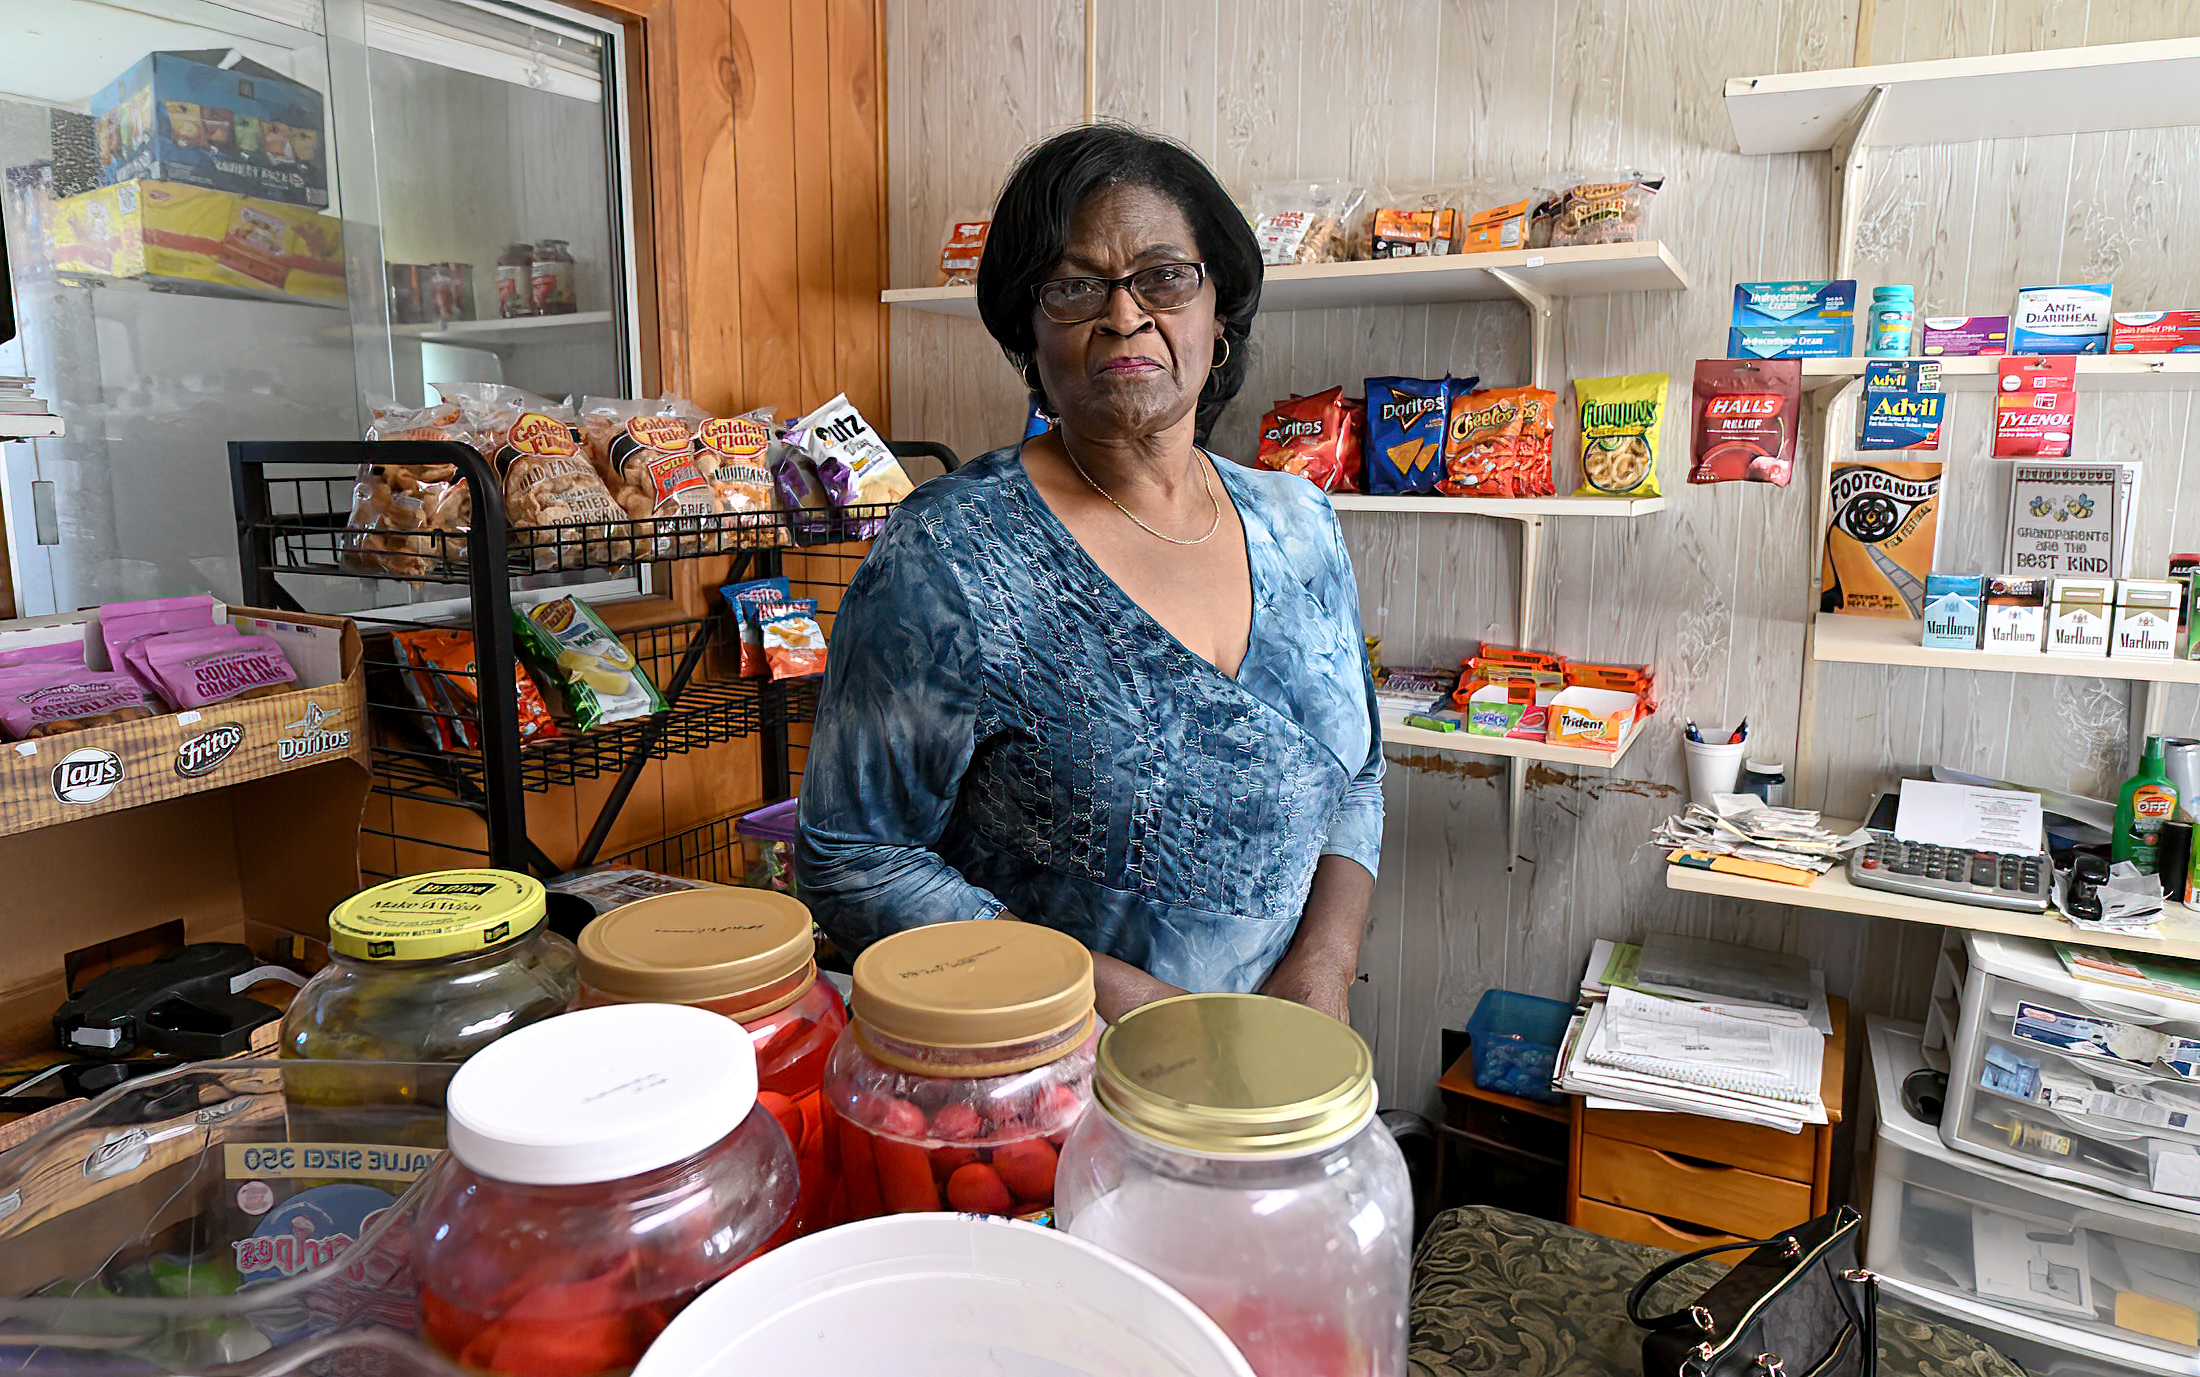 Dorothy Oliver stands behind the counter of the convenience store she runs in Alabama